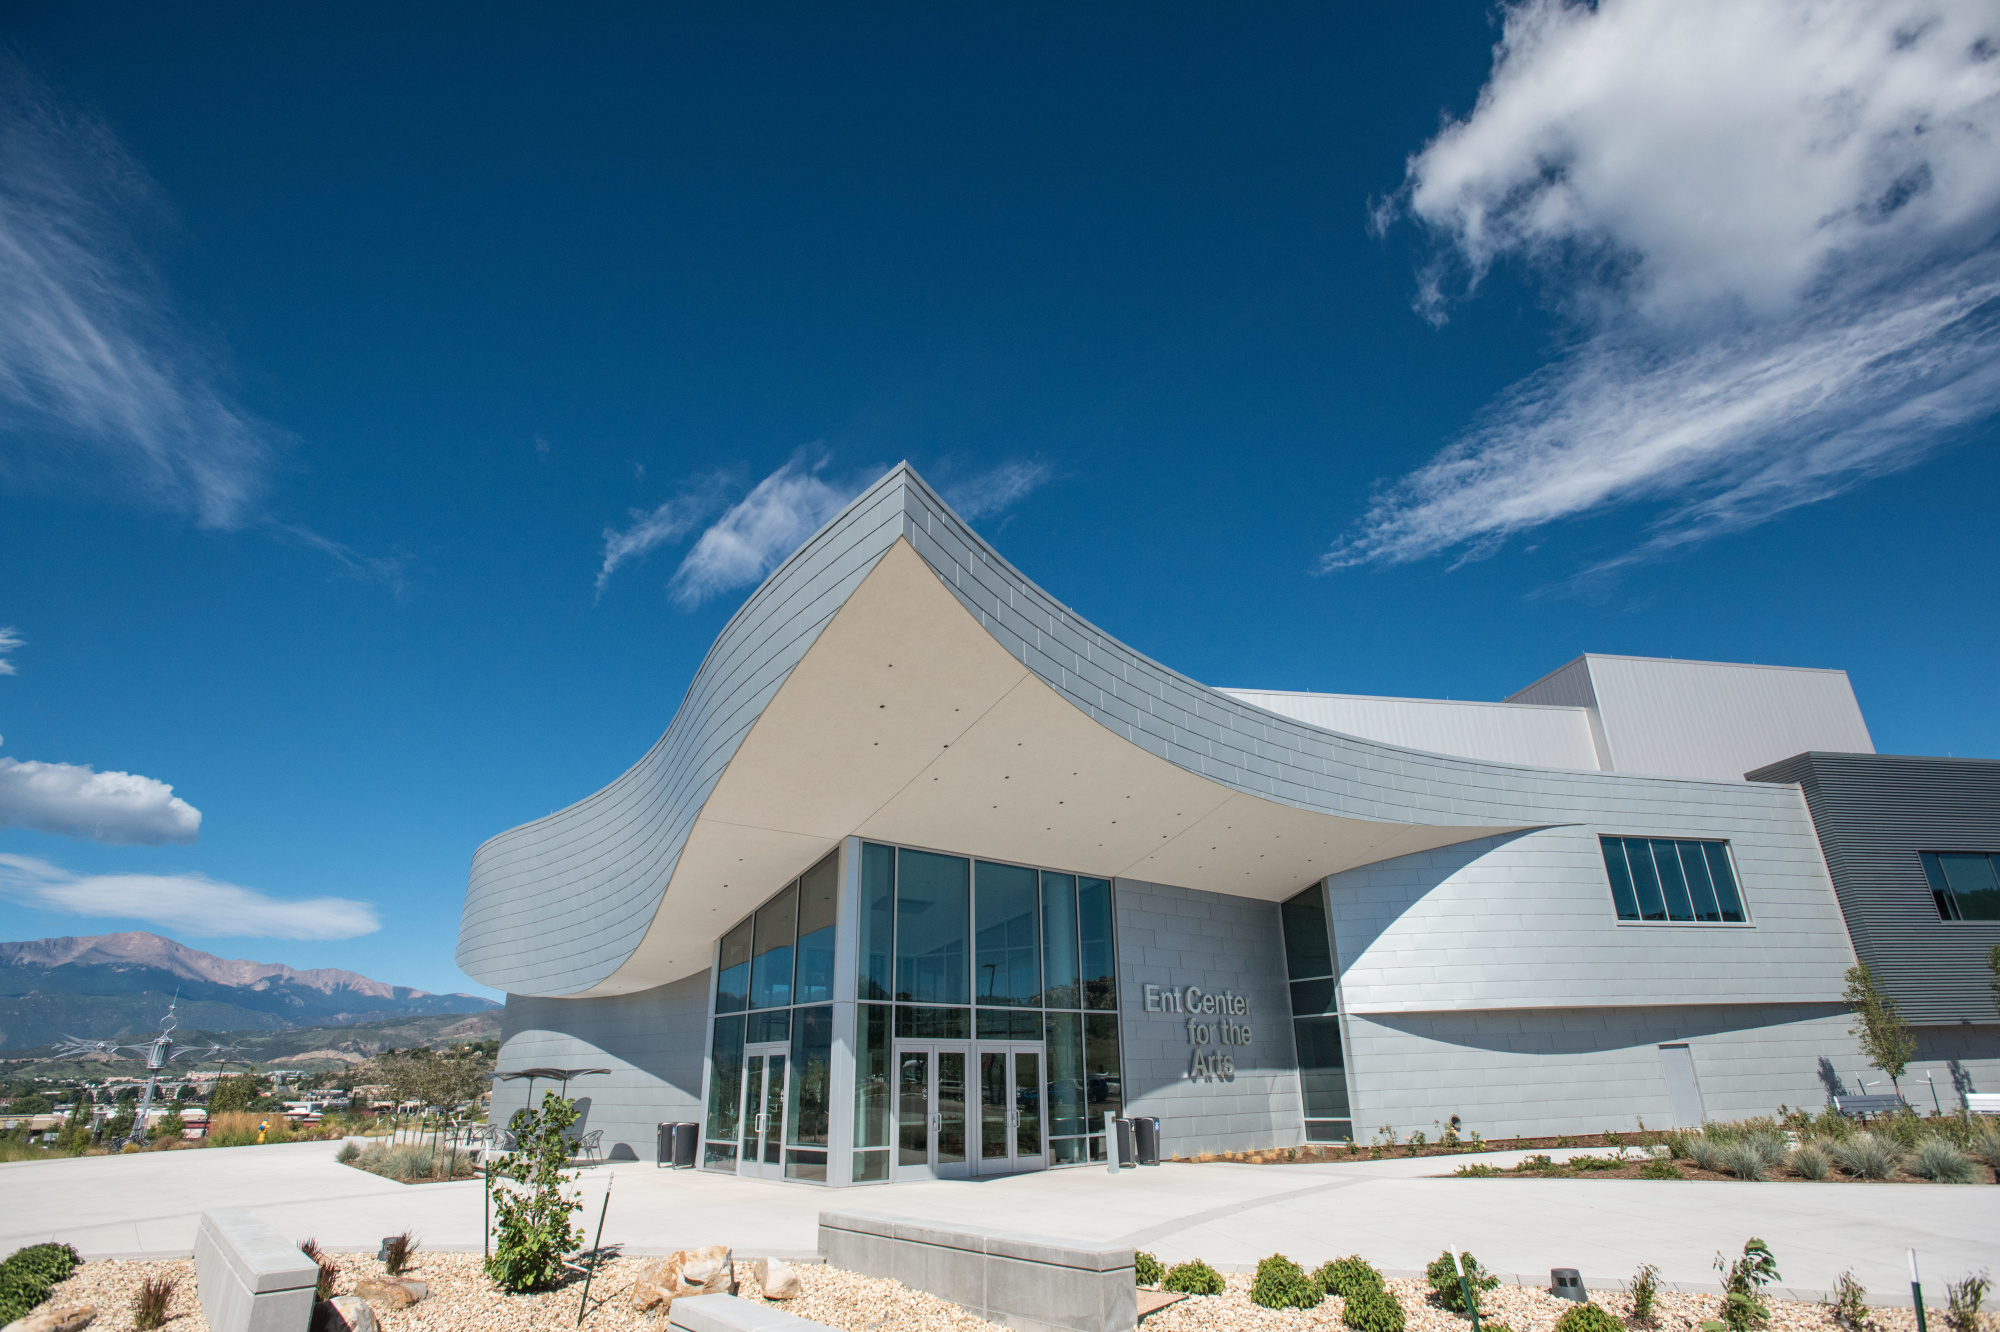 The Ent Center for Visual & Performing Arts Building on UCCS Campus